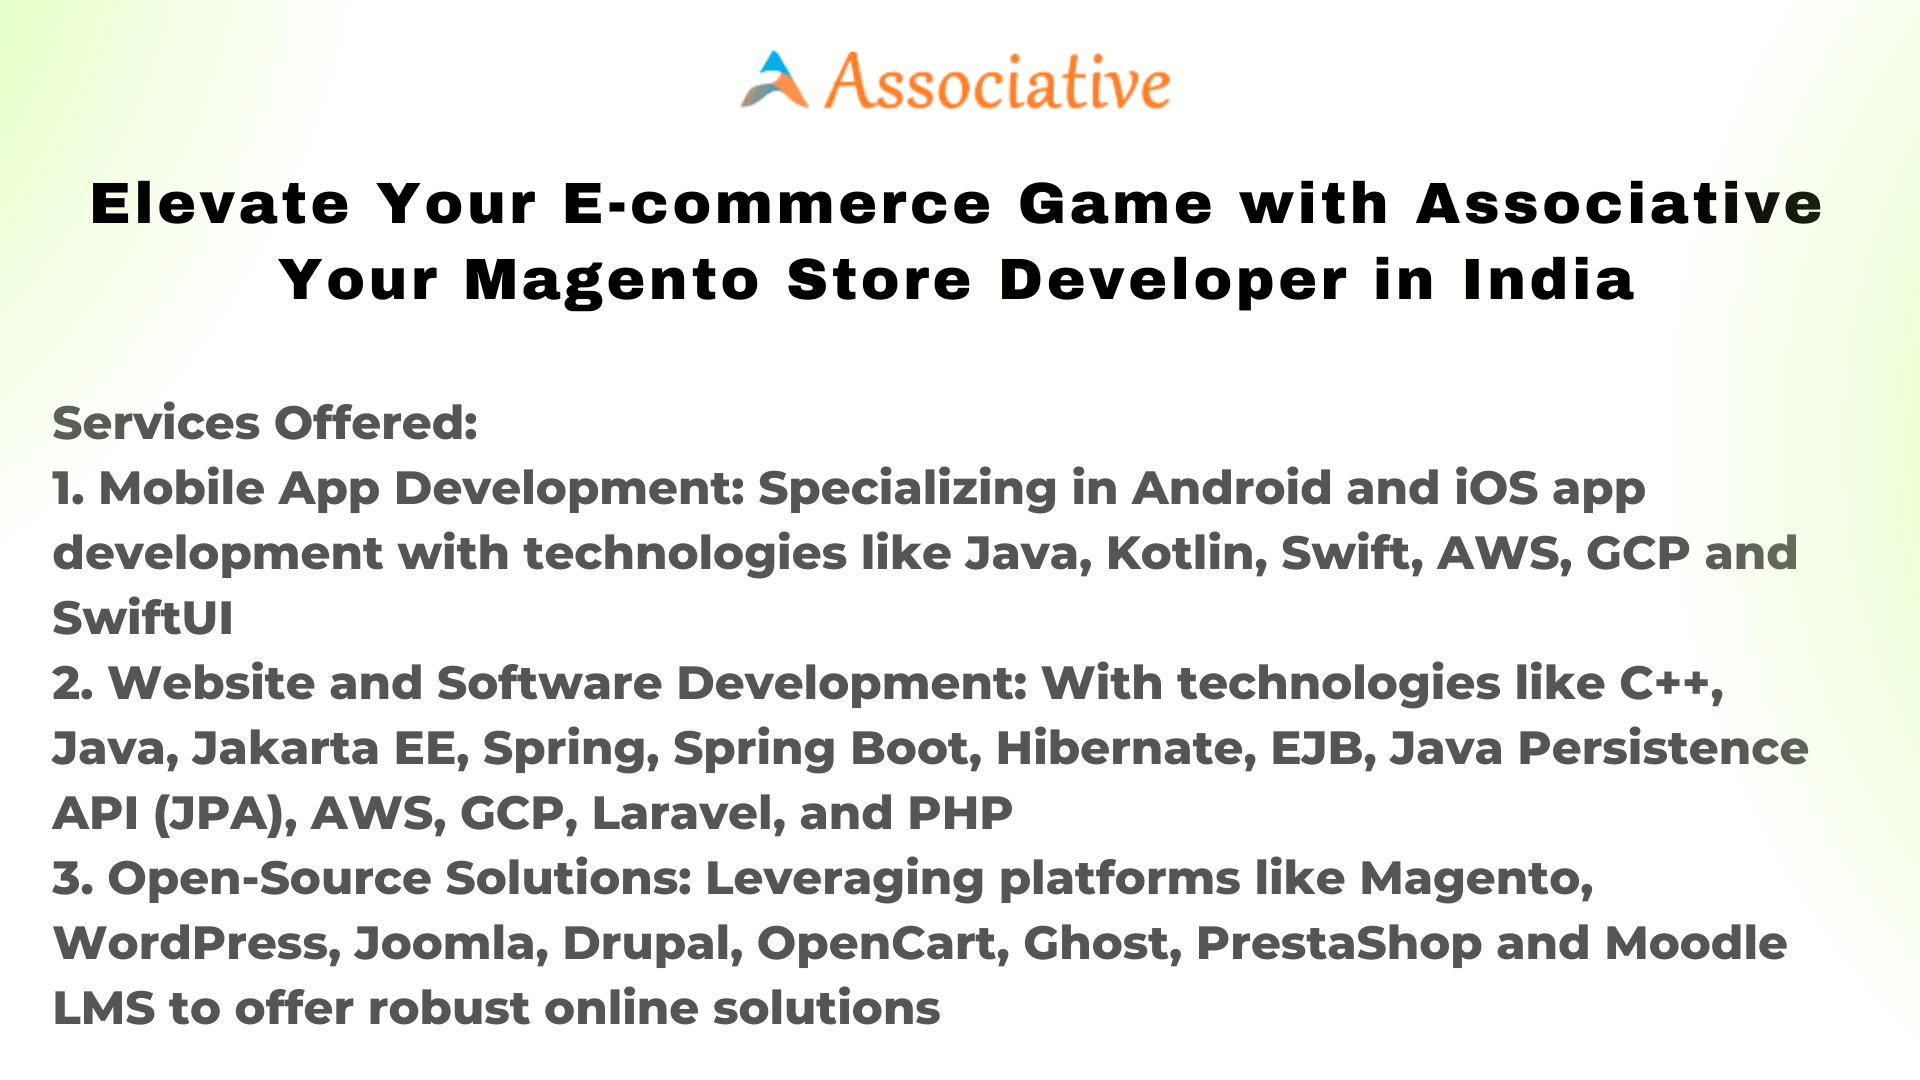 Elevate Your E-commerce Game with Associative Your Magento Store Developer in India